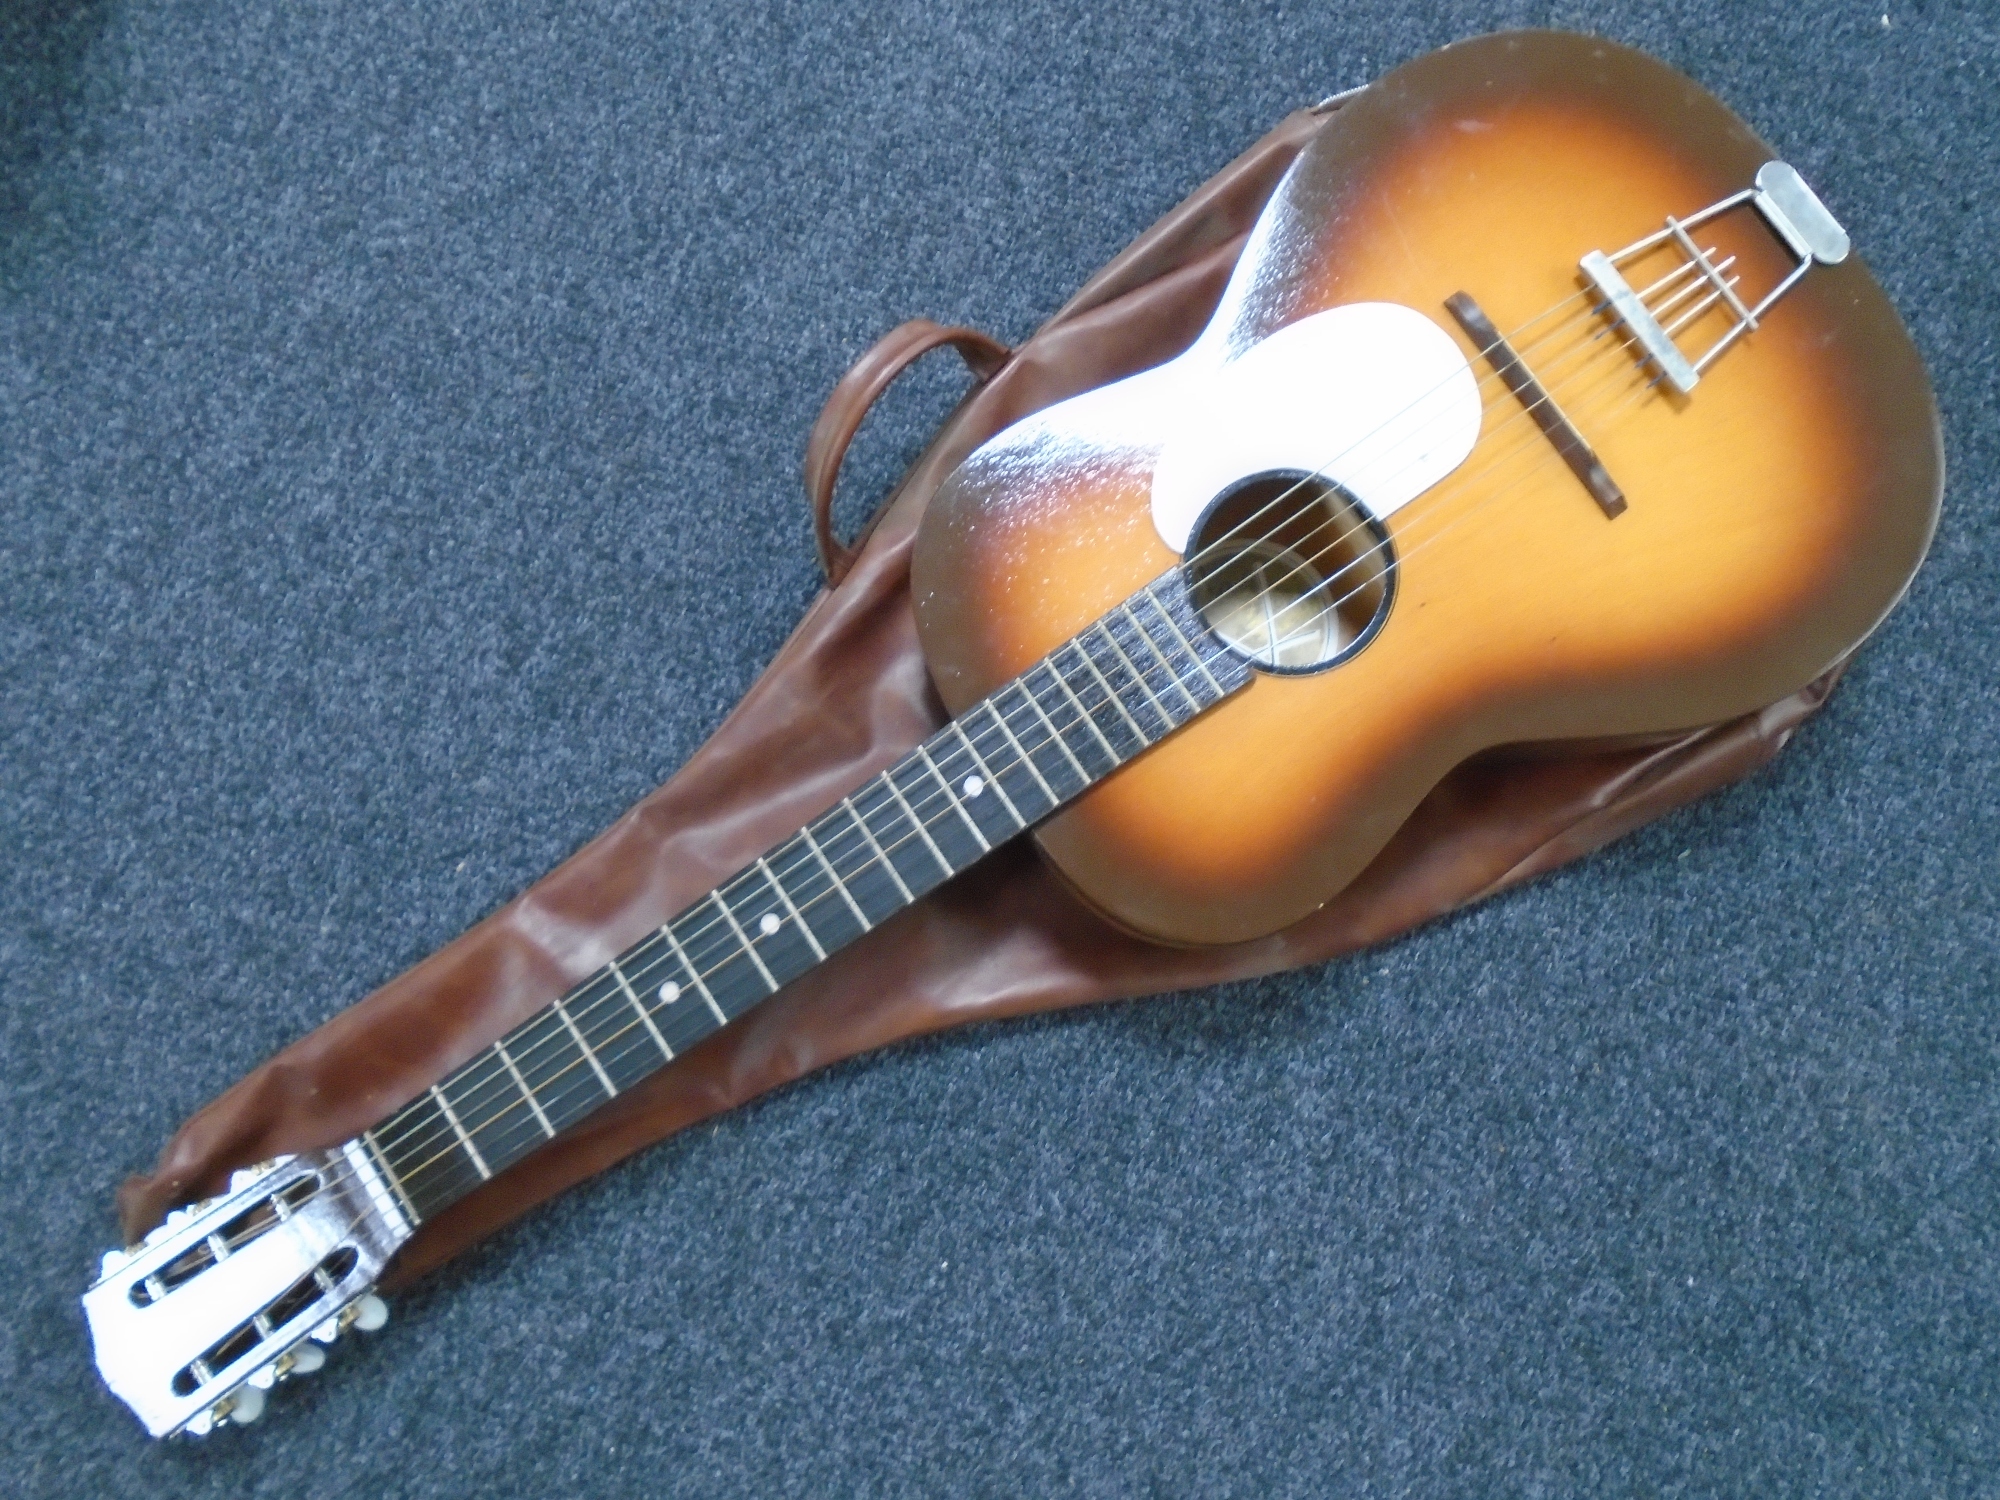 A Kansas acoustic guitar in carry bag.